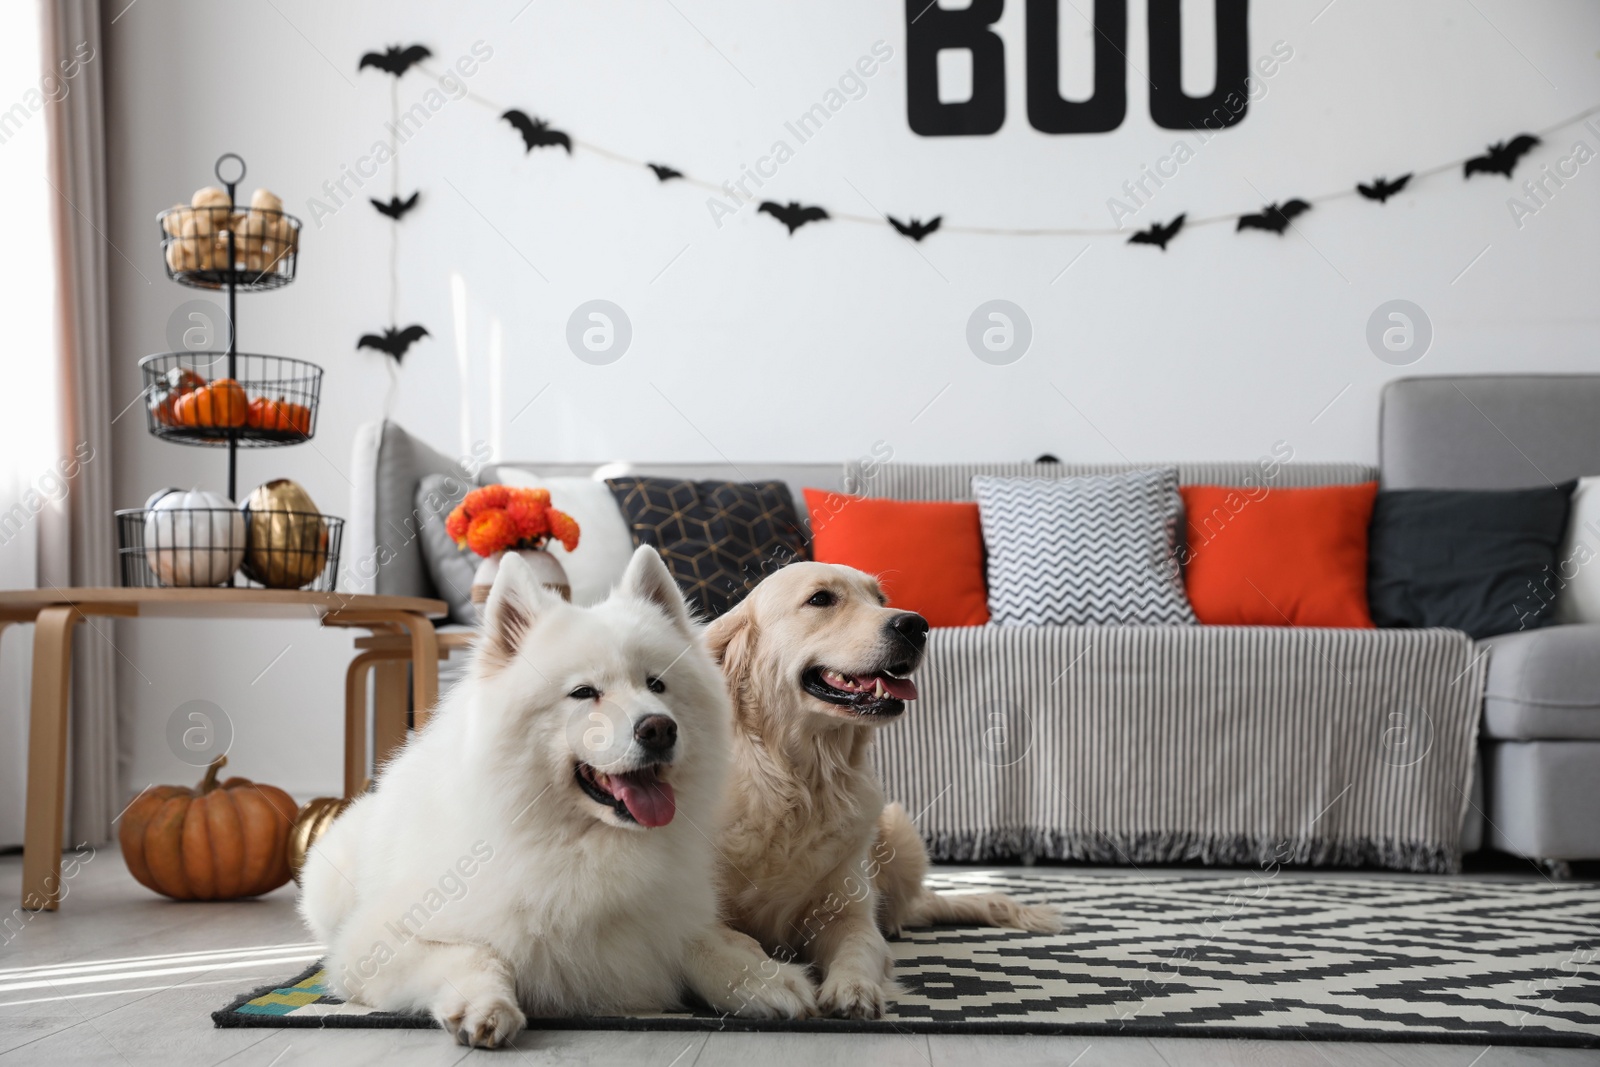 Photo of Cute dogs in room decorated for Halloween